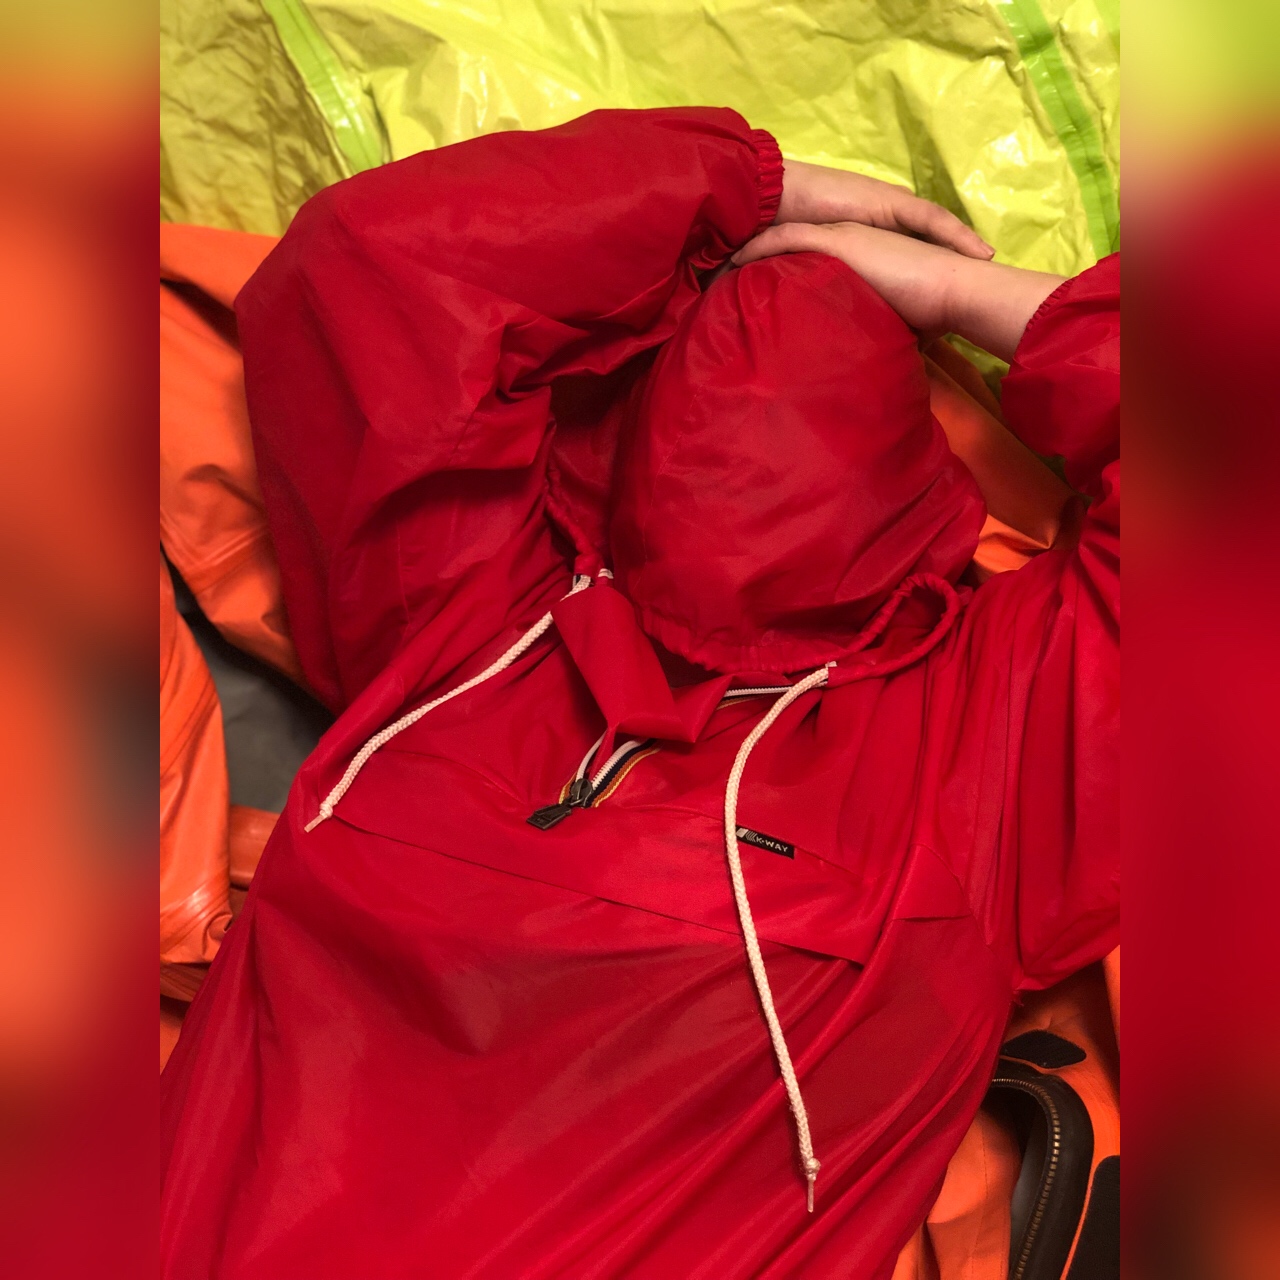 Red k-way pullover and a pile of hazmat suits